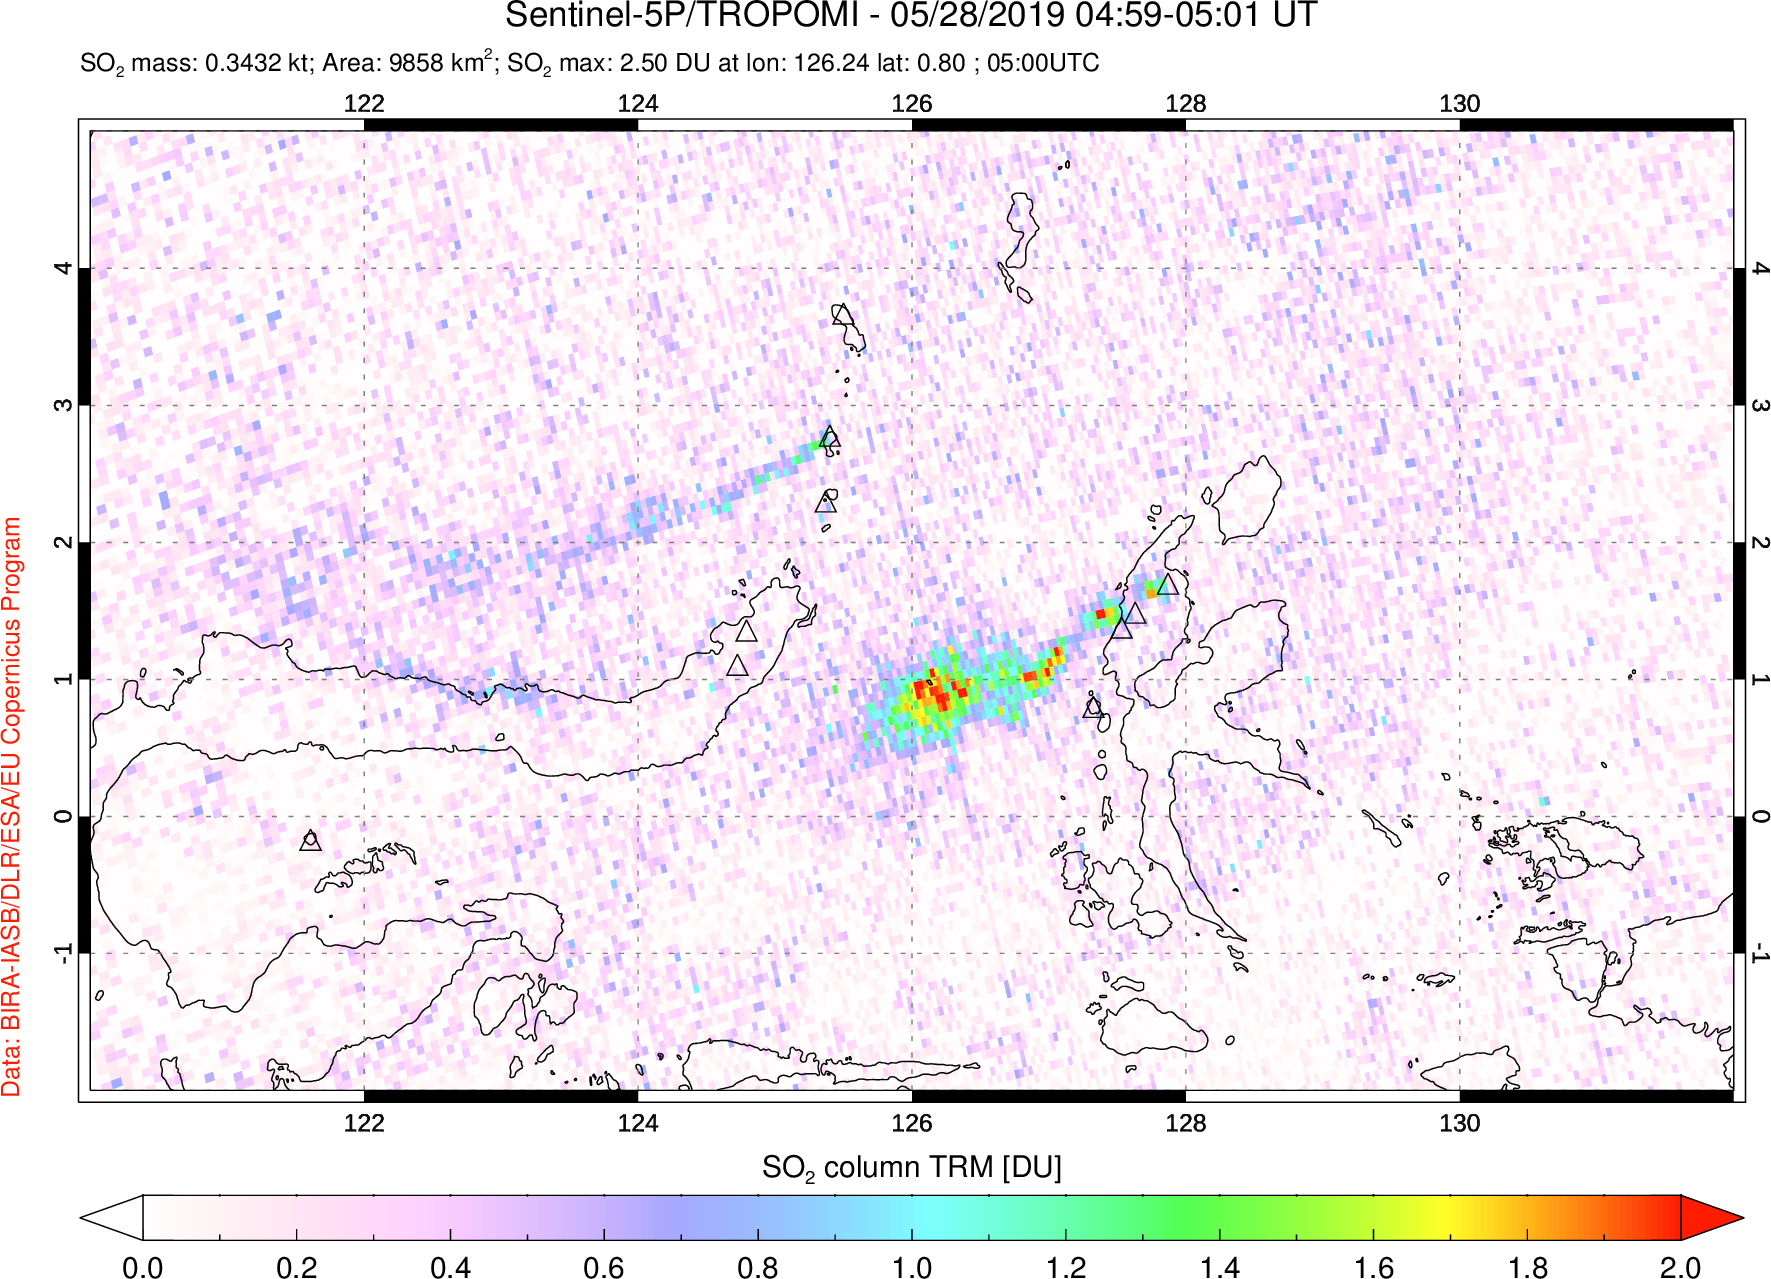 A sulfur dioxide image over Northern Sulawesi & Halmahera, Indonesia on May 28, 2019.